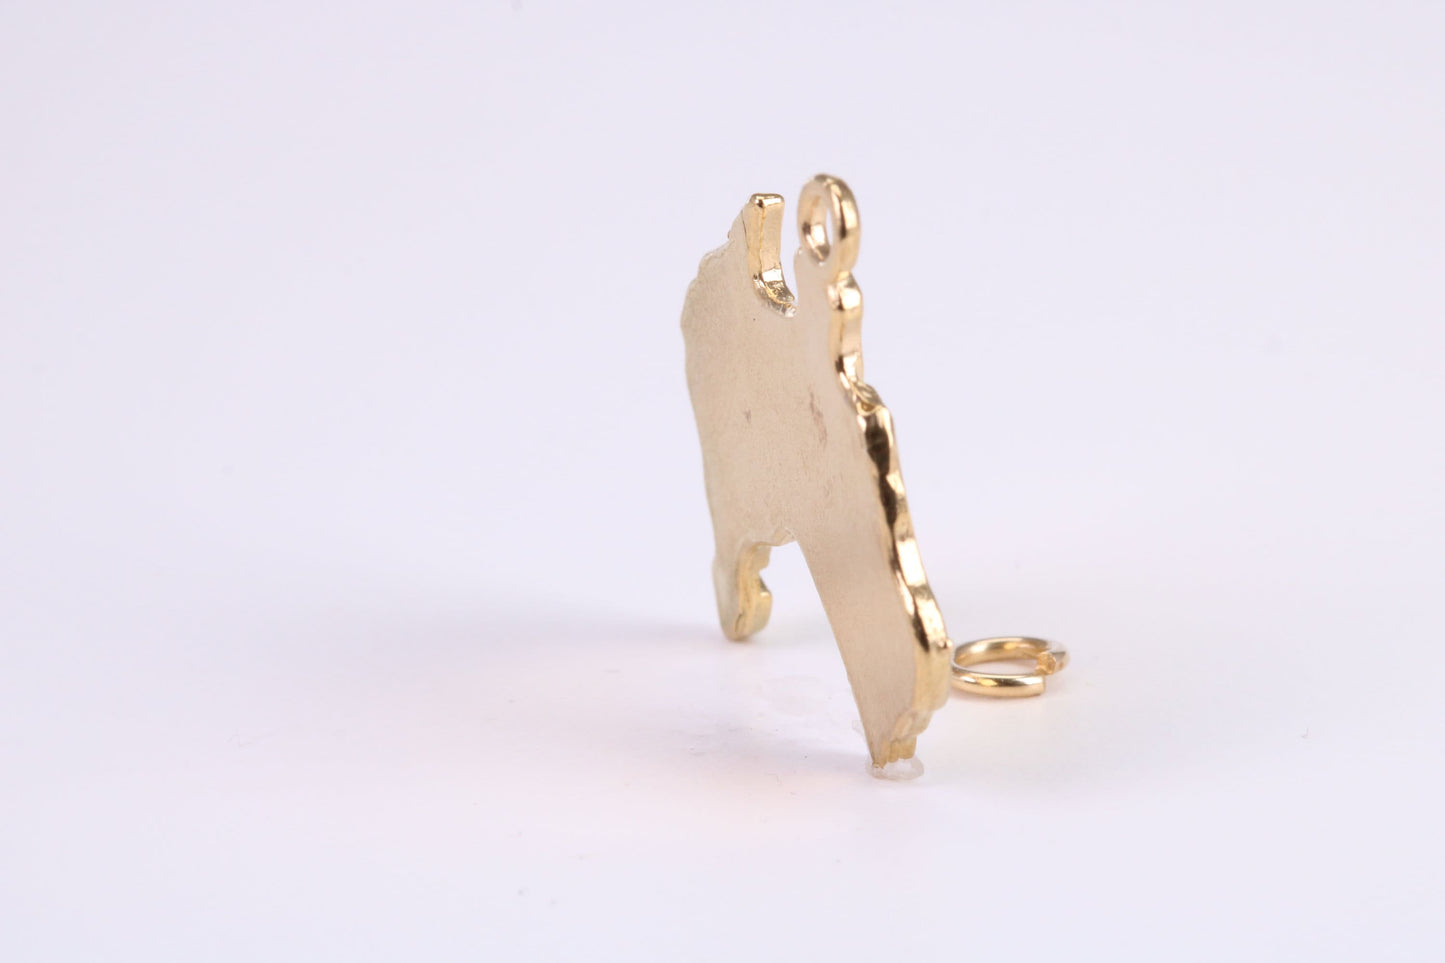 Australia Charm, Traditional Charm, Made from Solid Yellow Gold, British Hallmarked, Complete with Attachment Link